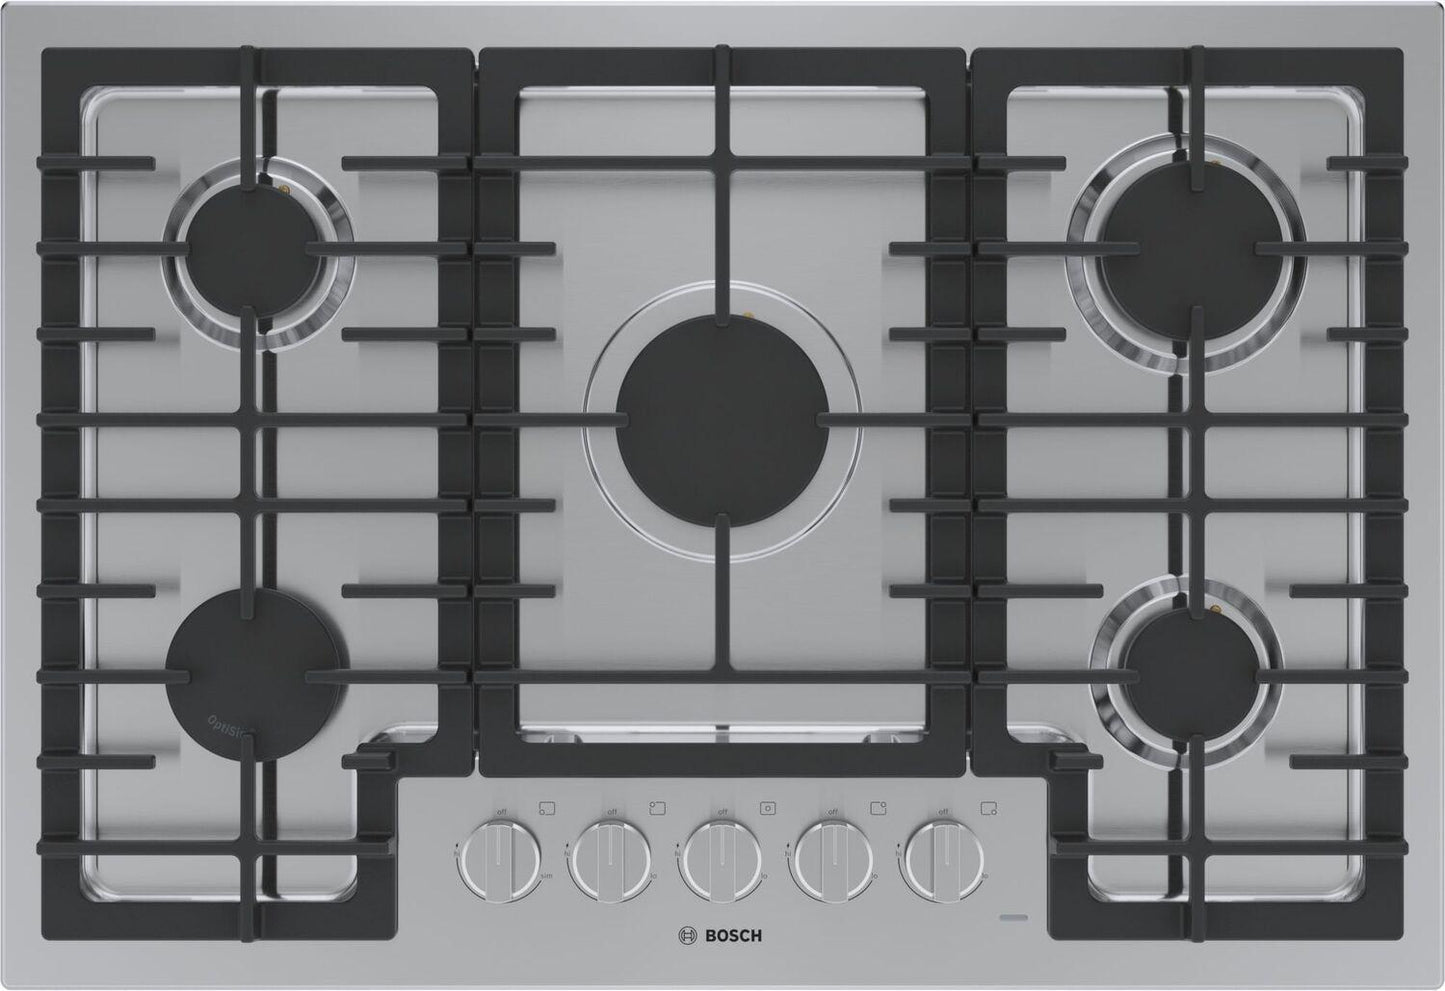 Bosch NGM5059UC 500 Series Gas Cooktop 30" Stainless Steel Ngm5059Uc